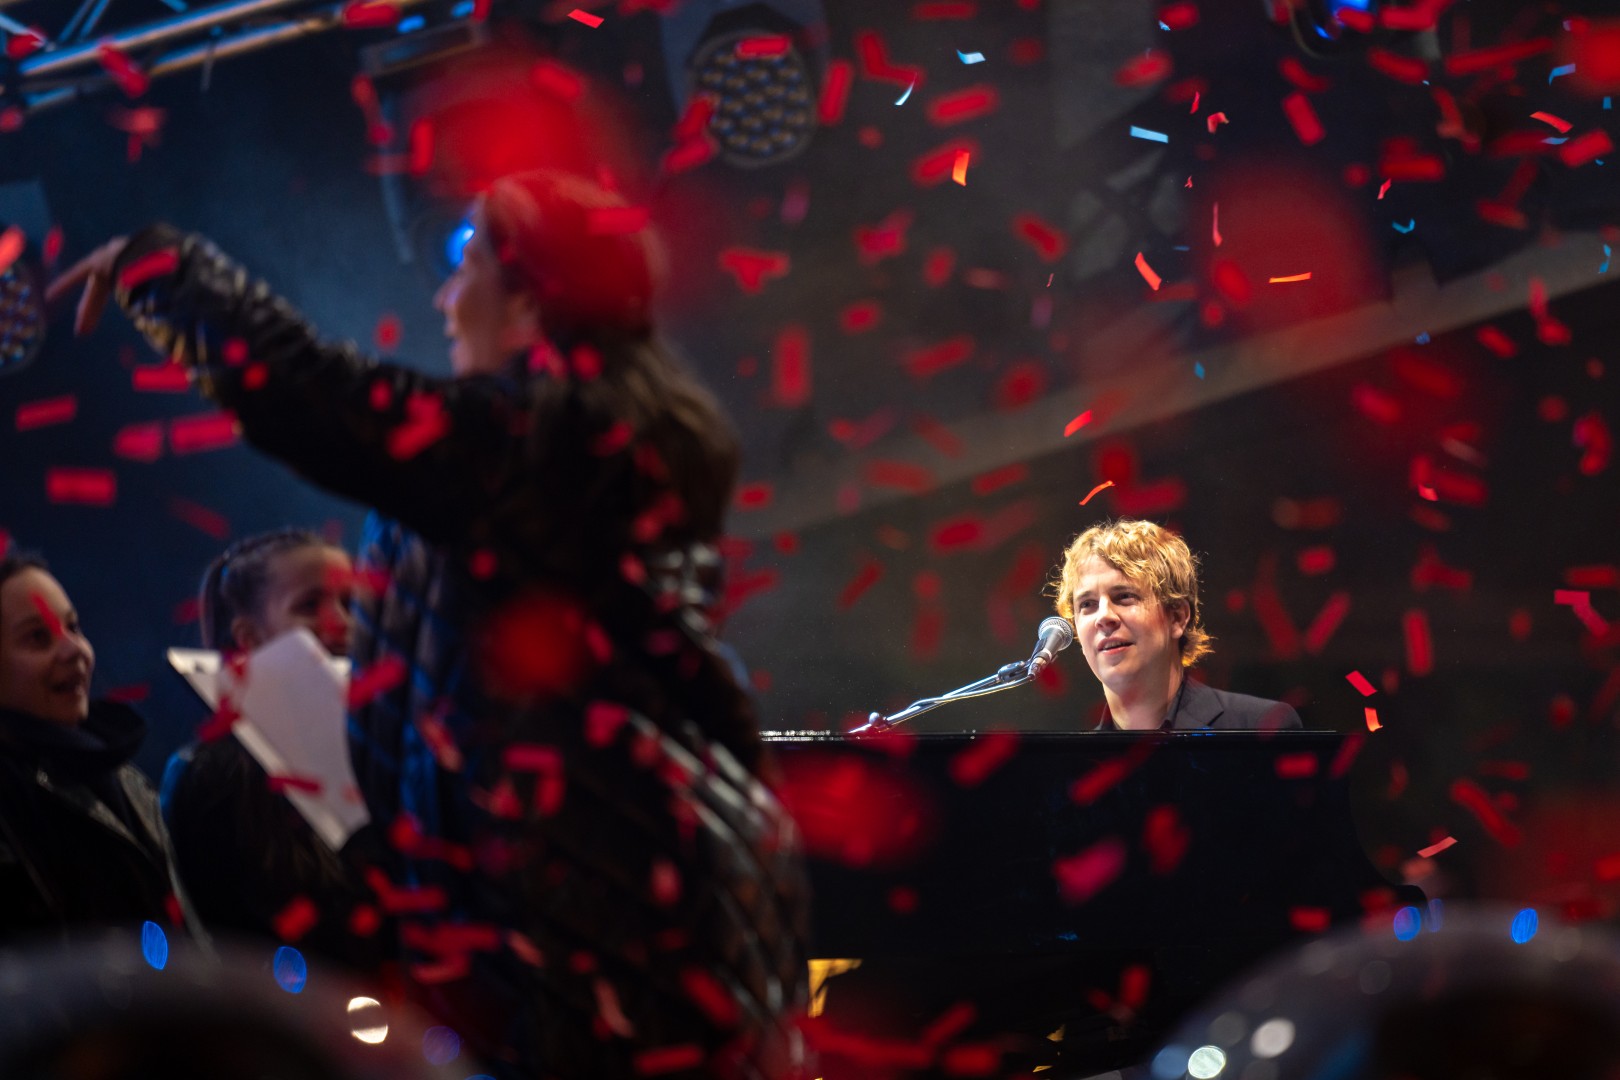 Tom Odell at National Arena in Bucharest on March 12, 2022 (deacb68ec1)